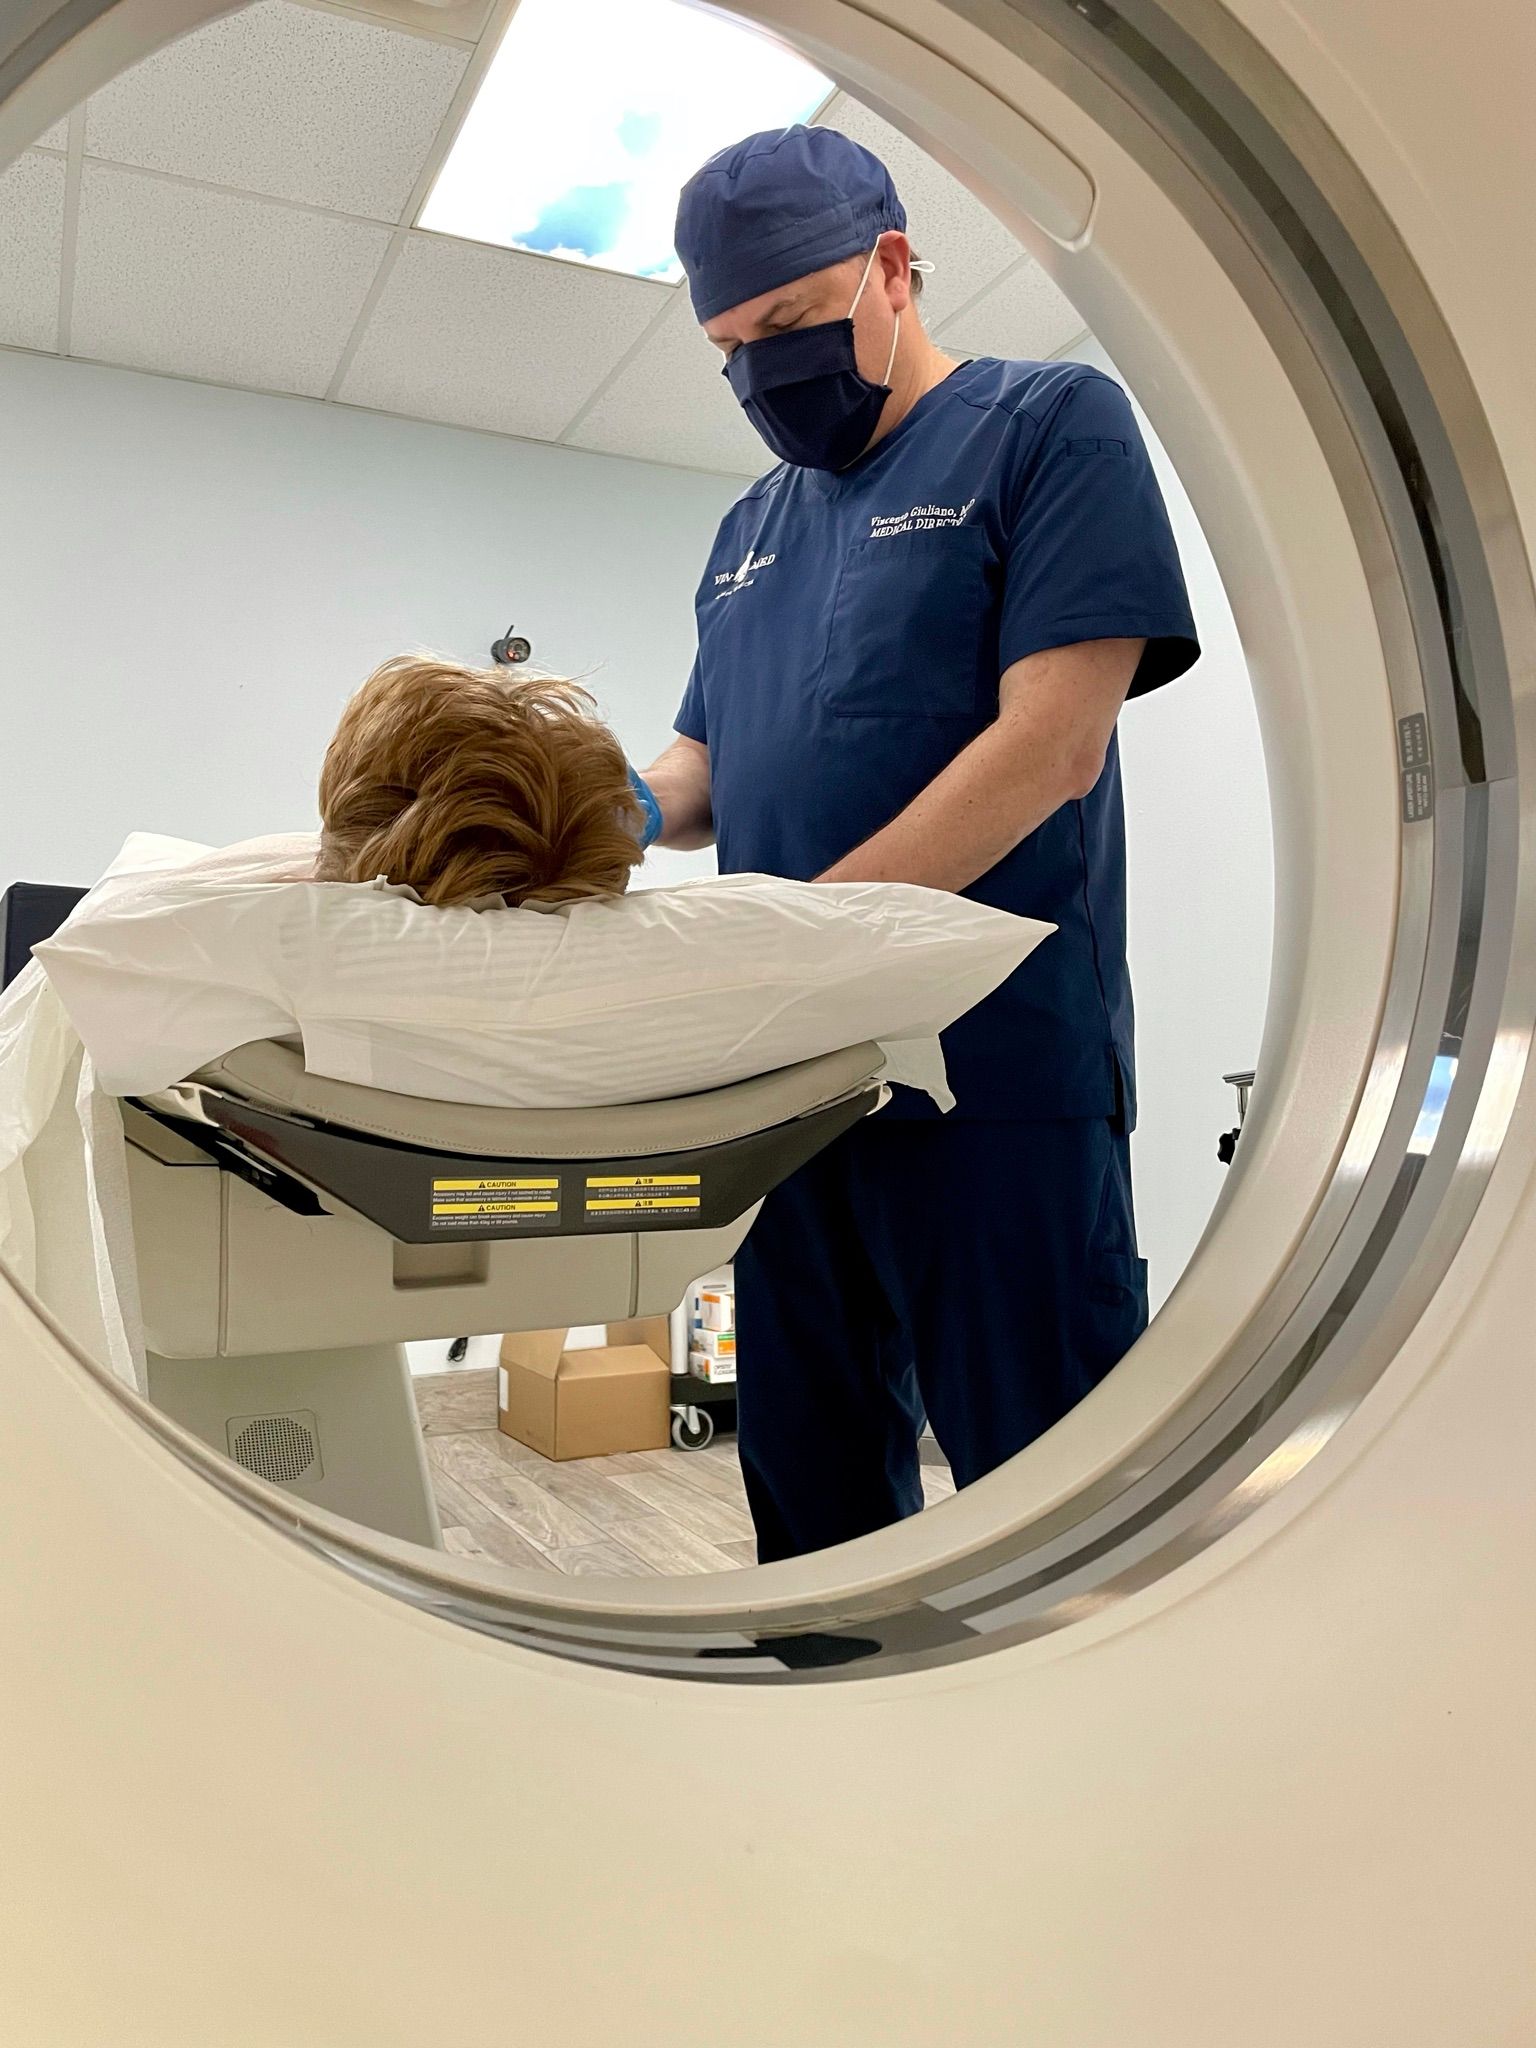 MRI Services in Winter Springs and Oviedo